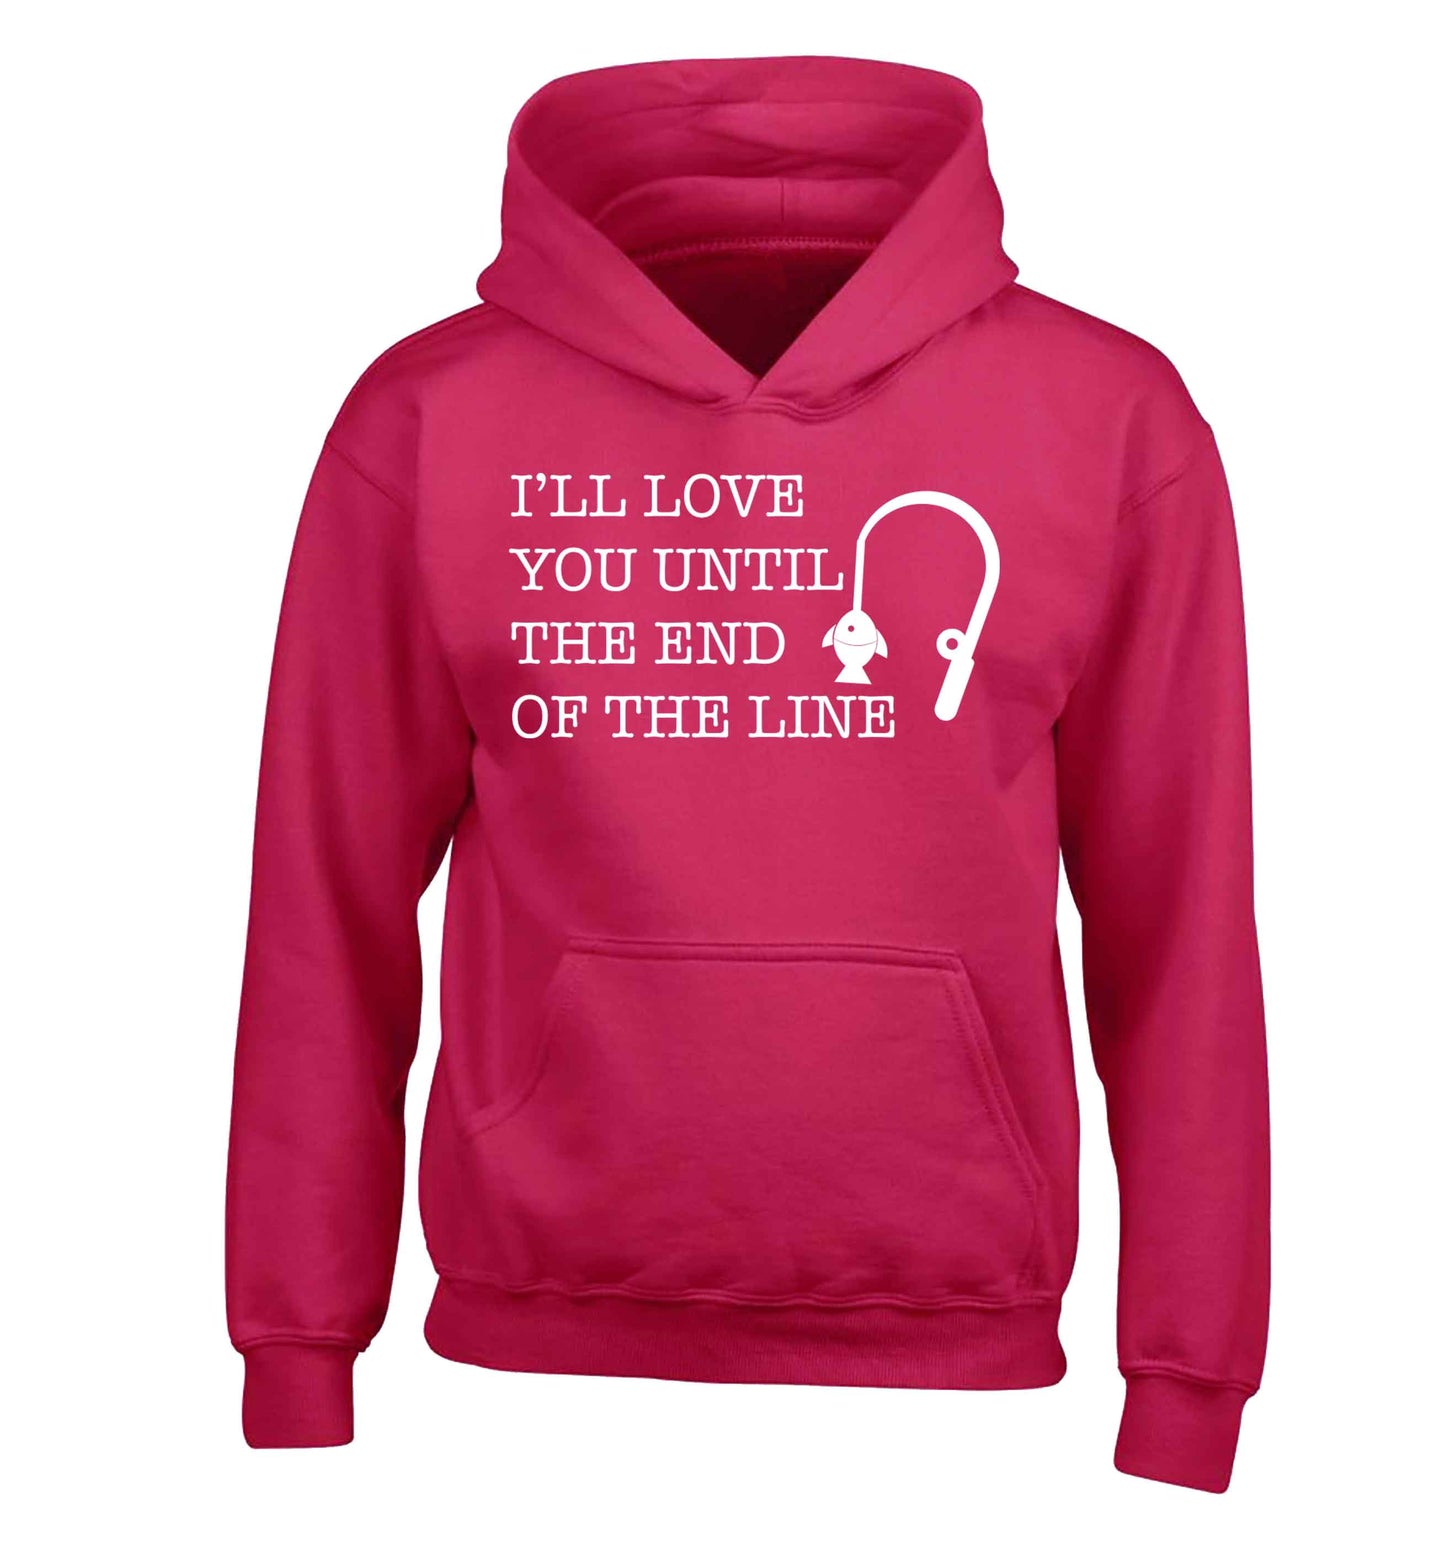 I'll love you until the end of the line children's pink hoodie 12-13 Years